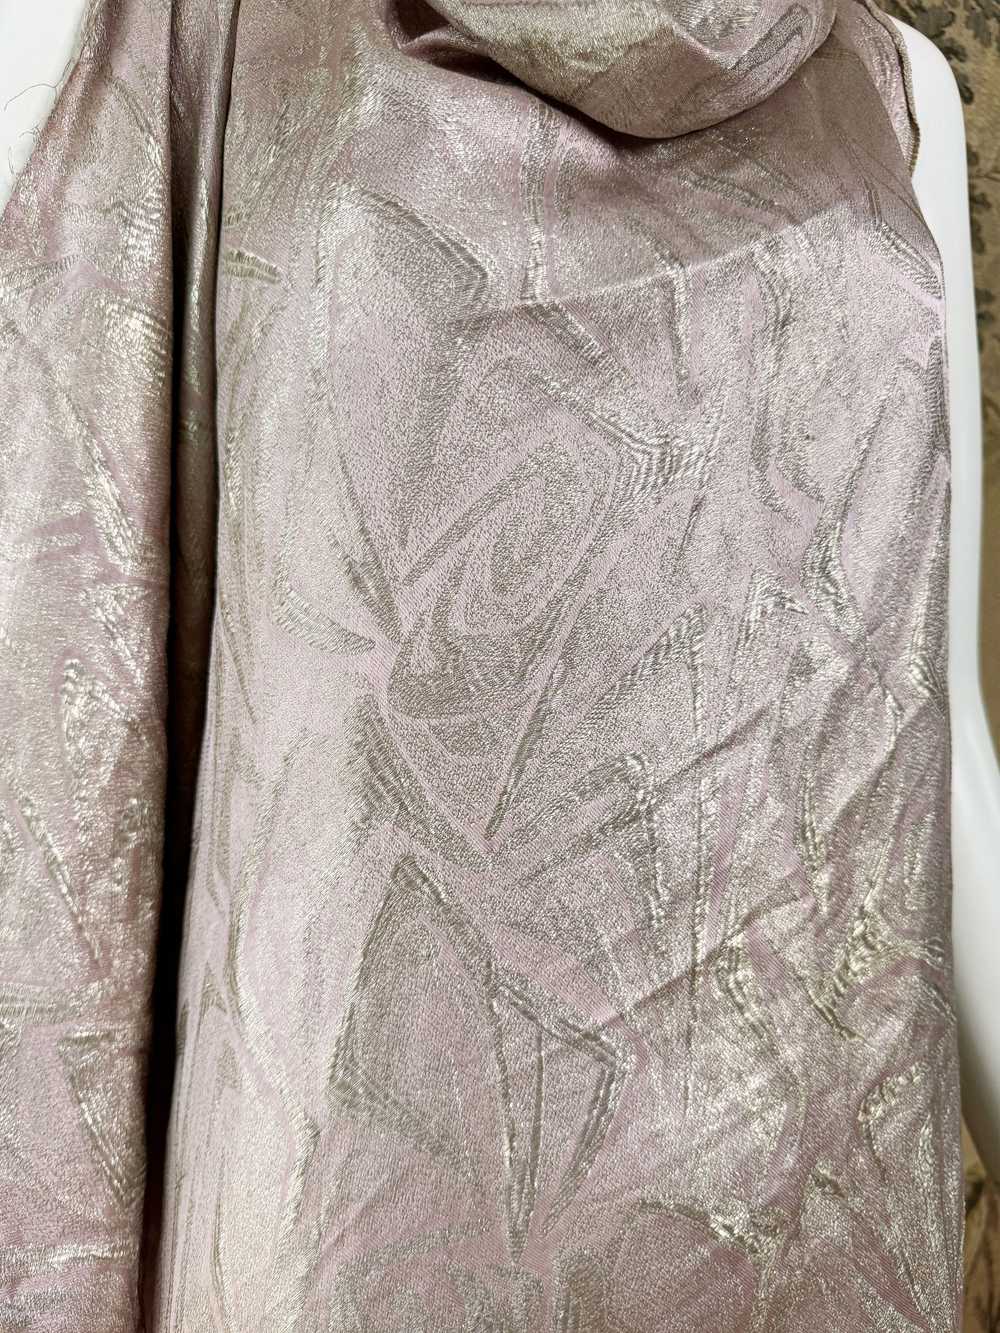 1930s Silver and Mauve Lamé Fabric - image 3